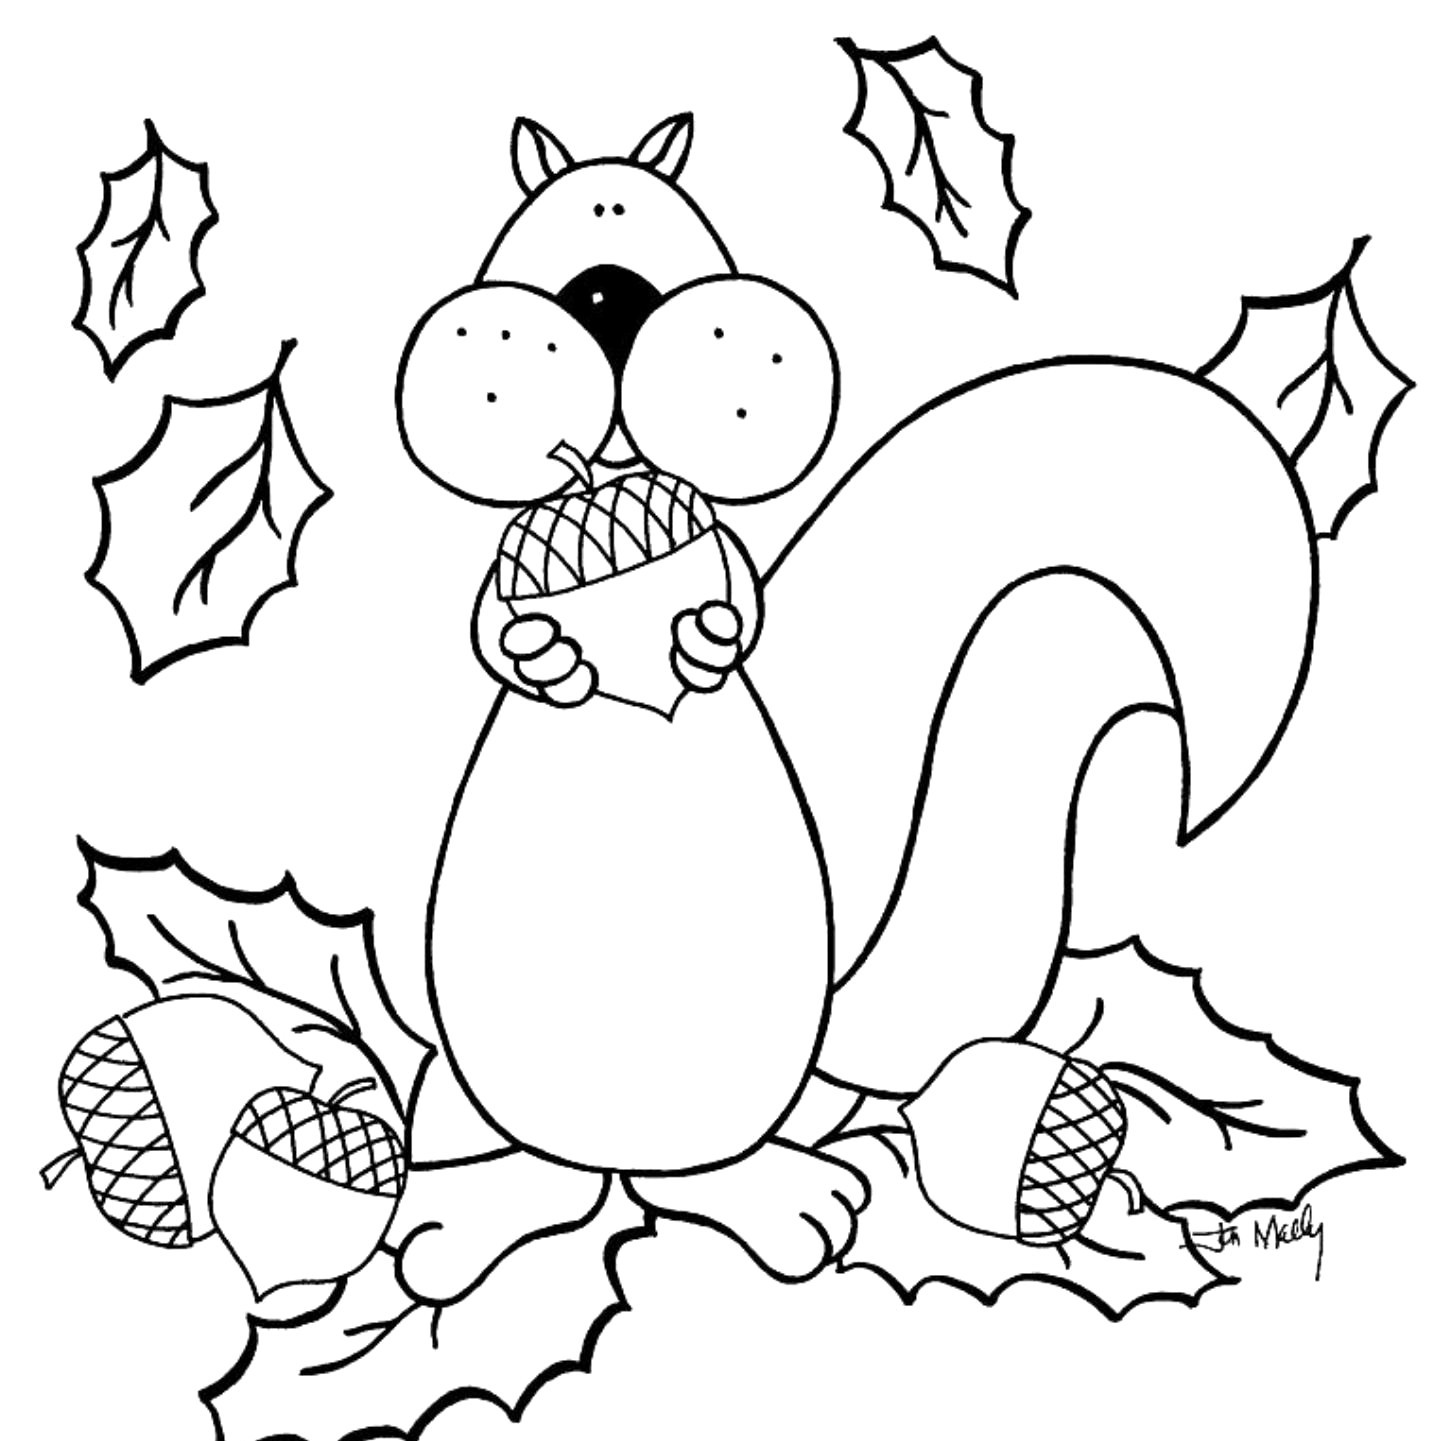 Printable Fall Coloring Pages
 Free Printable Fall Coloring Pages for Kids Best